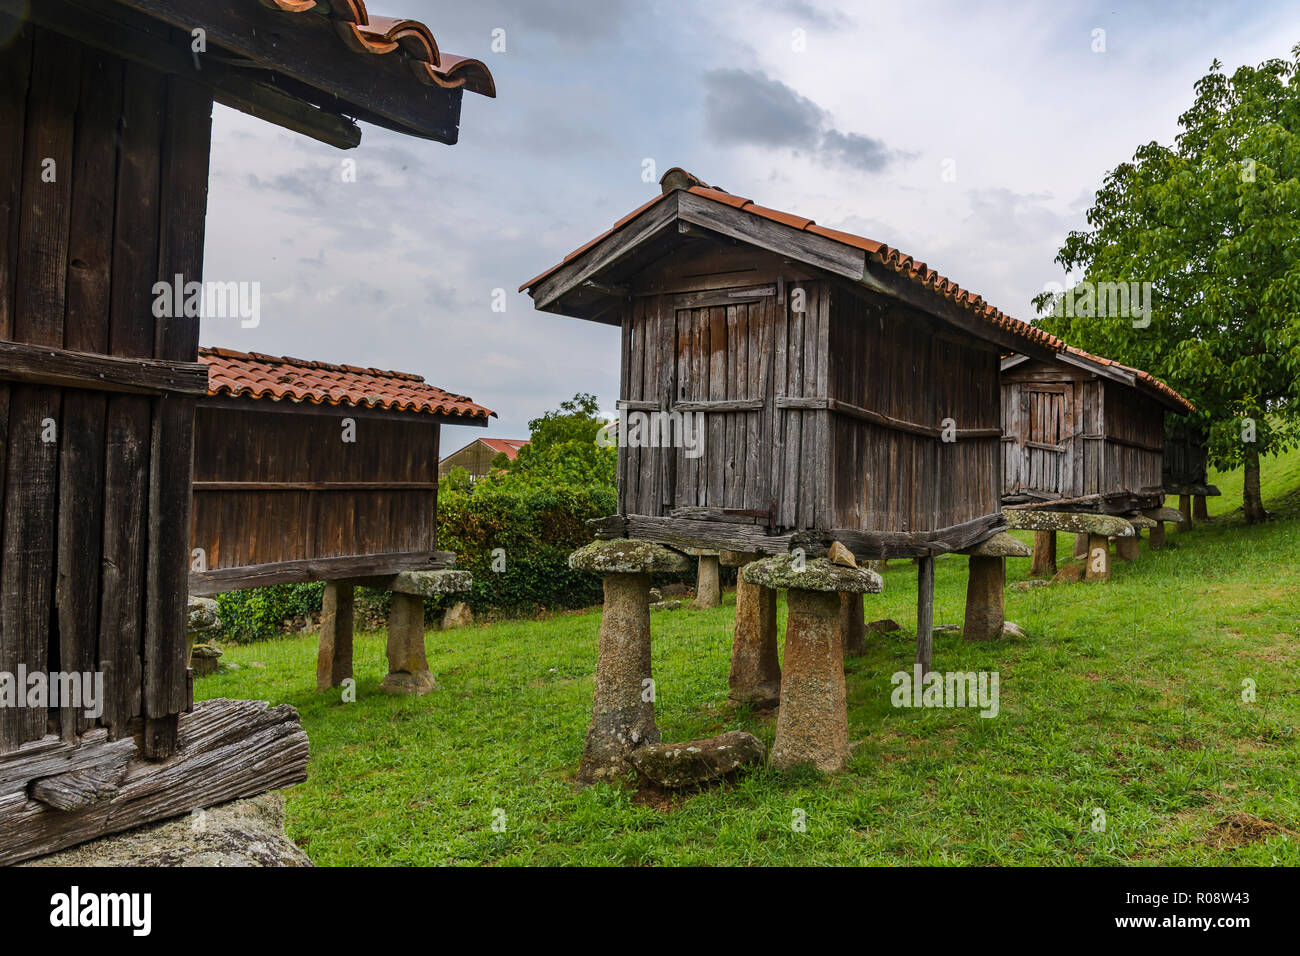 Galician hórreo construction of agricultural use destined to dry, cure and store corn and other cereals very typical in Galicia Spain Stock Photo